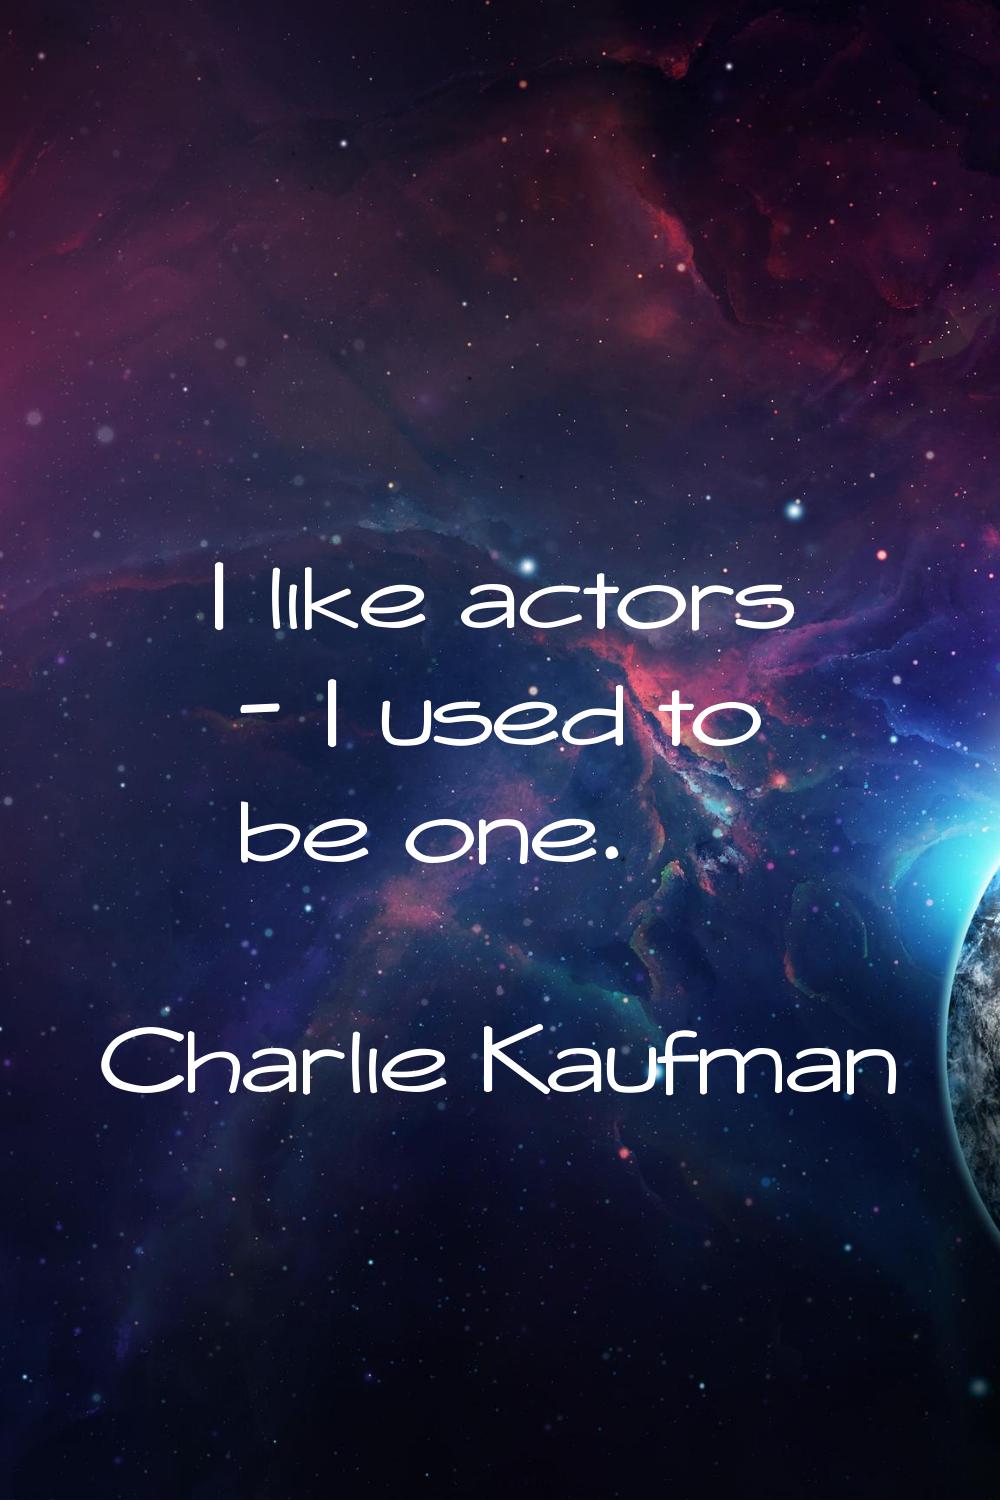 I like actors - I used to be one.